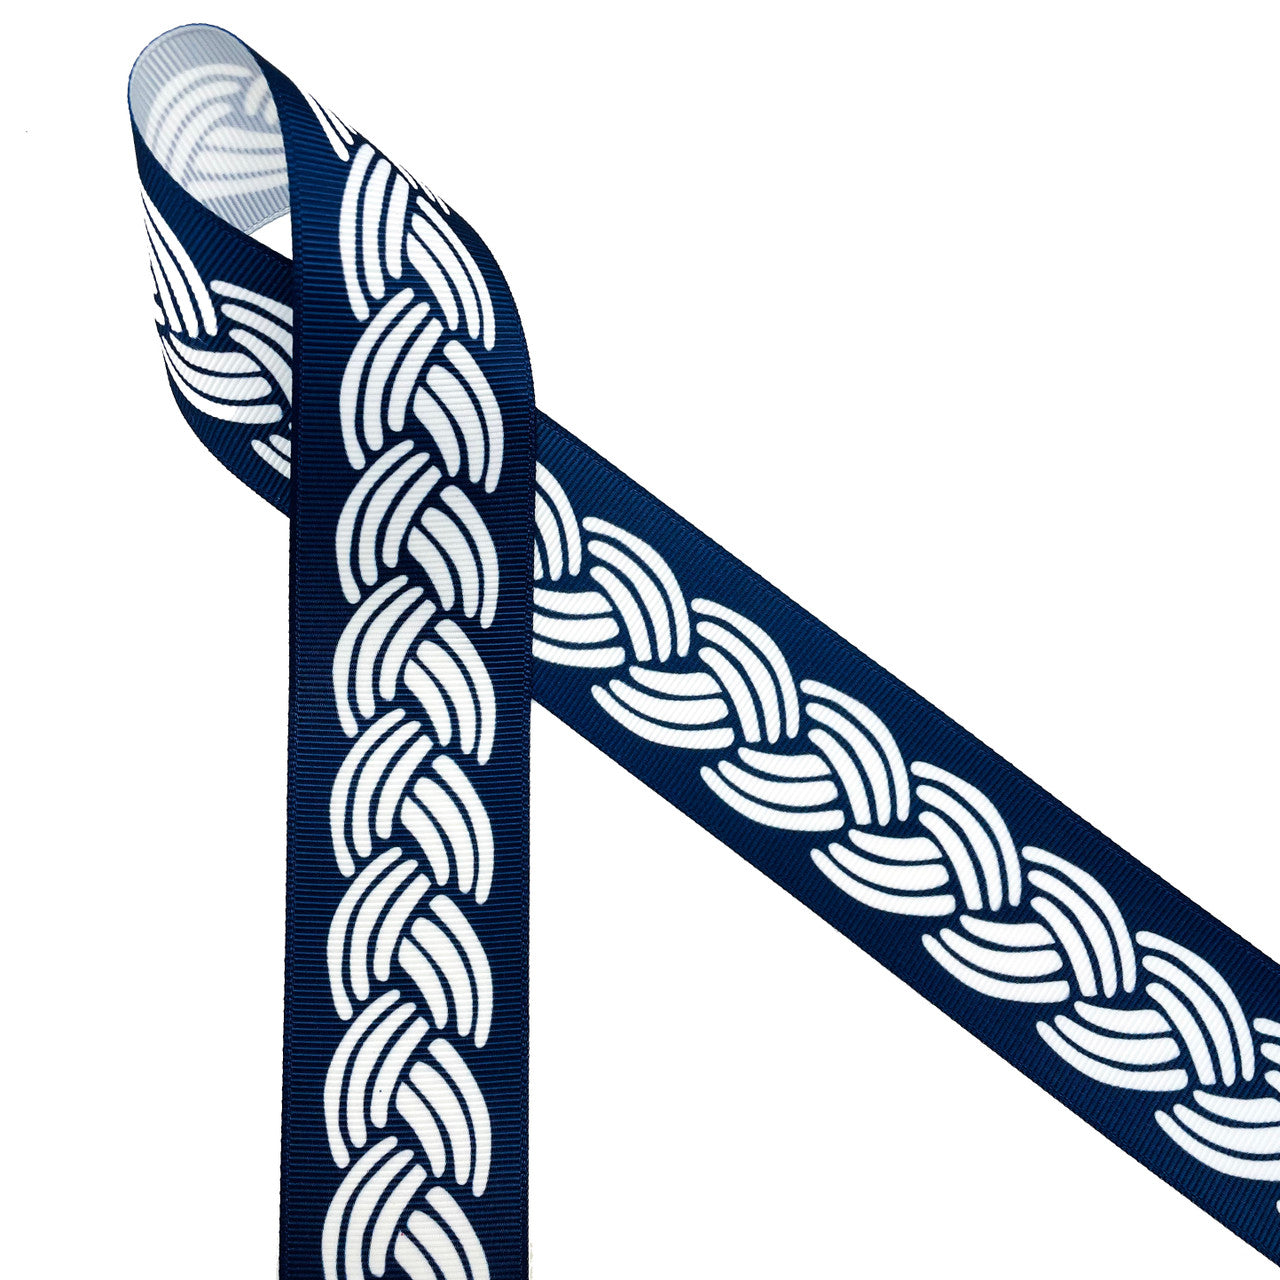 Nautical rope design on a navy blue background printed on 1.5